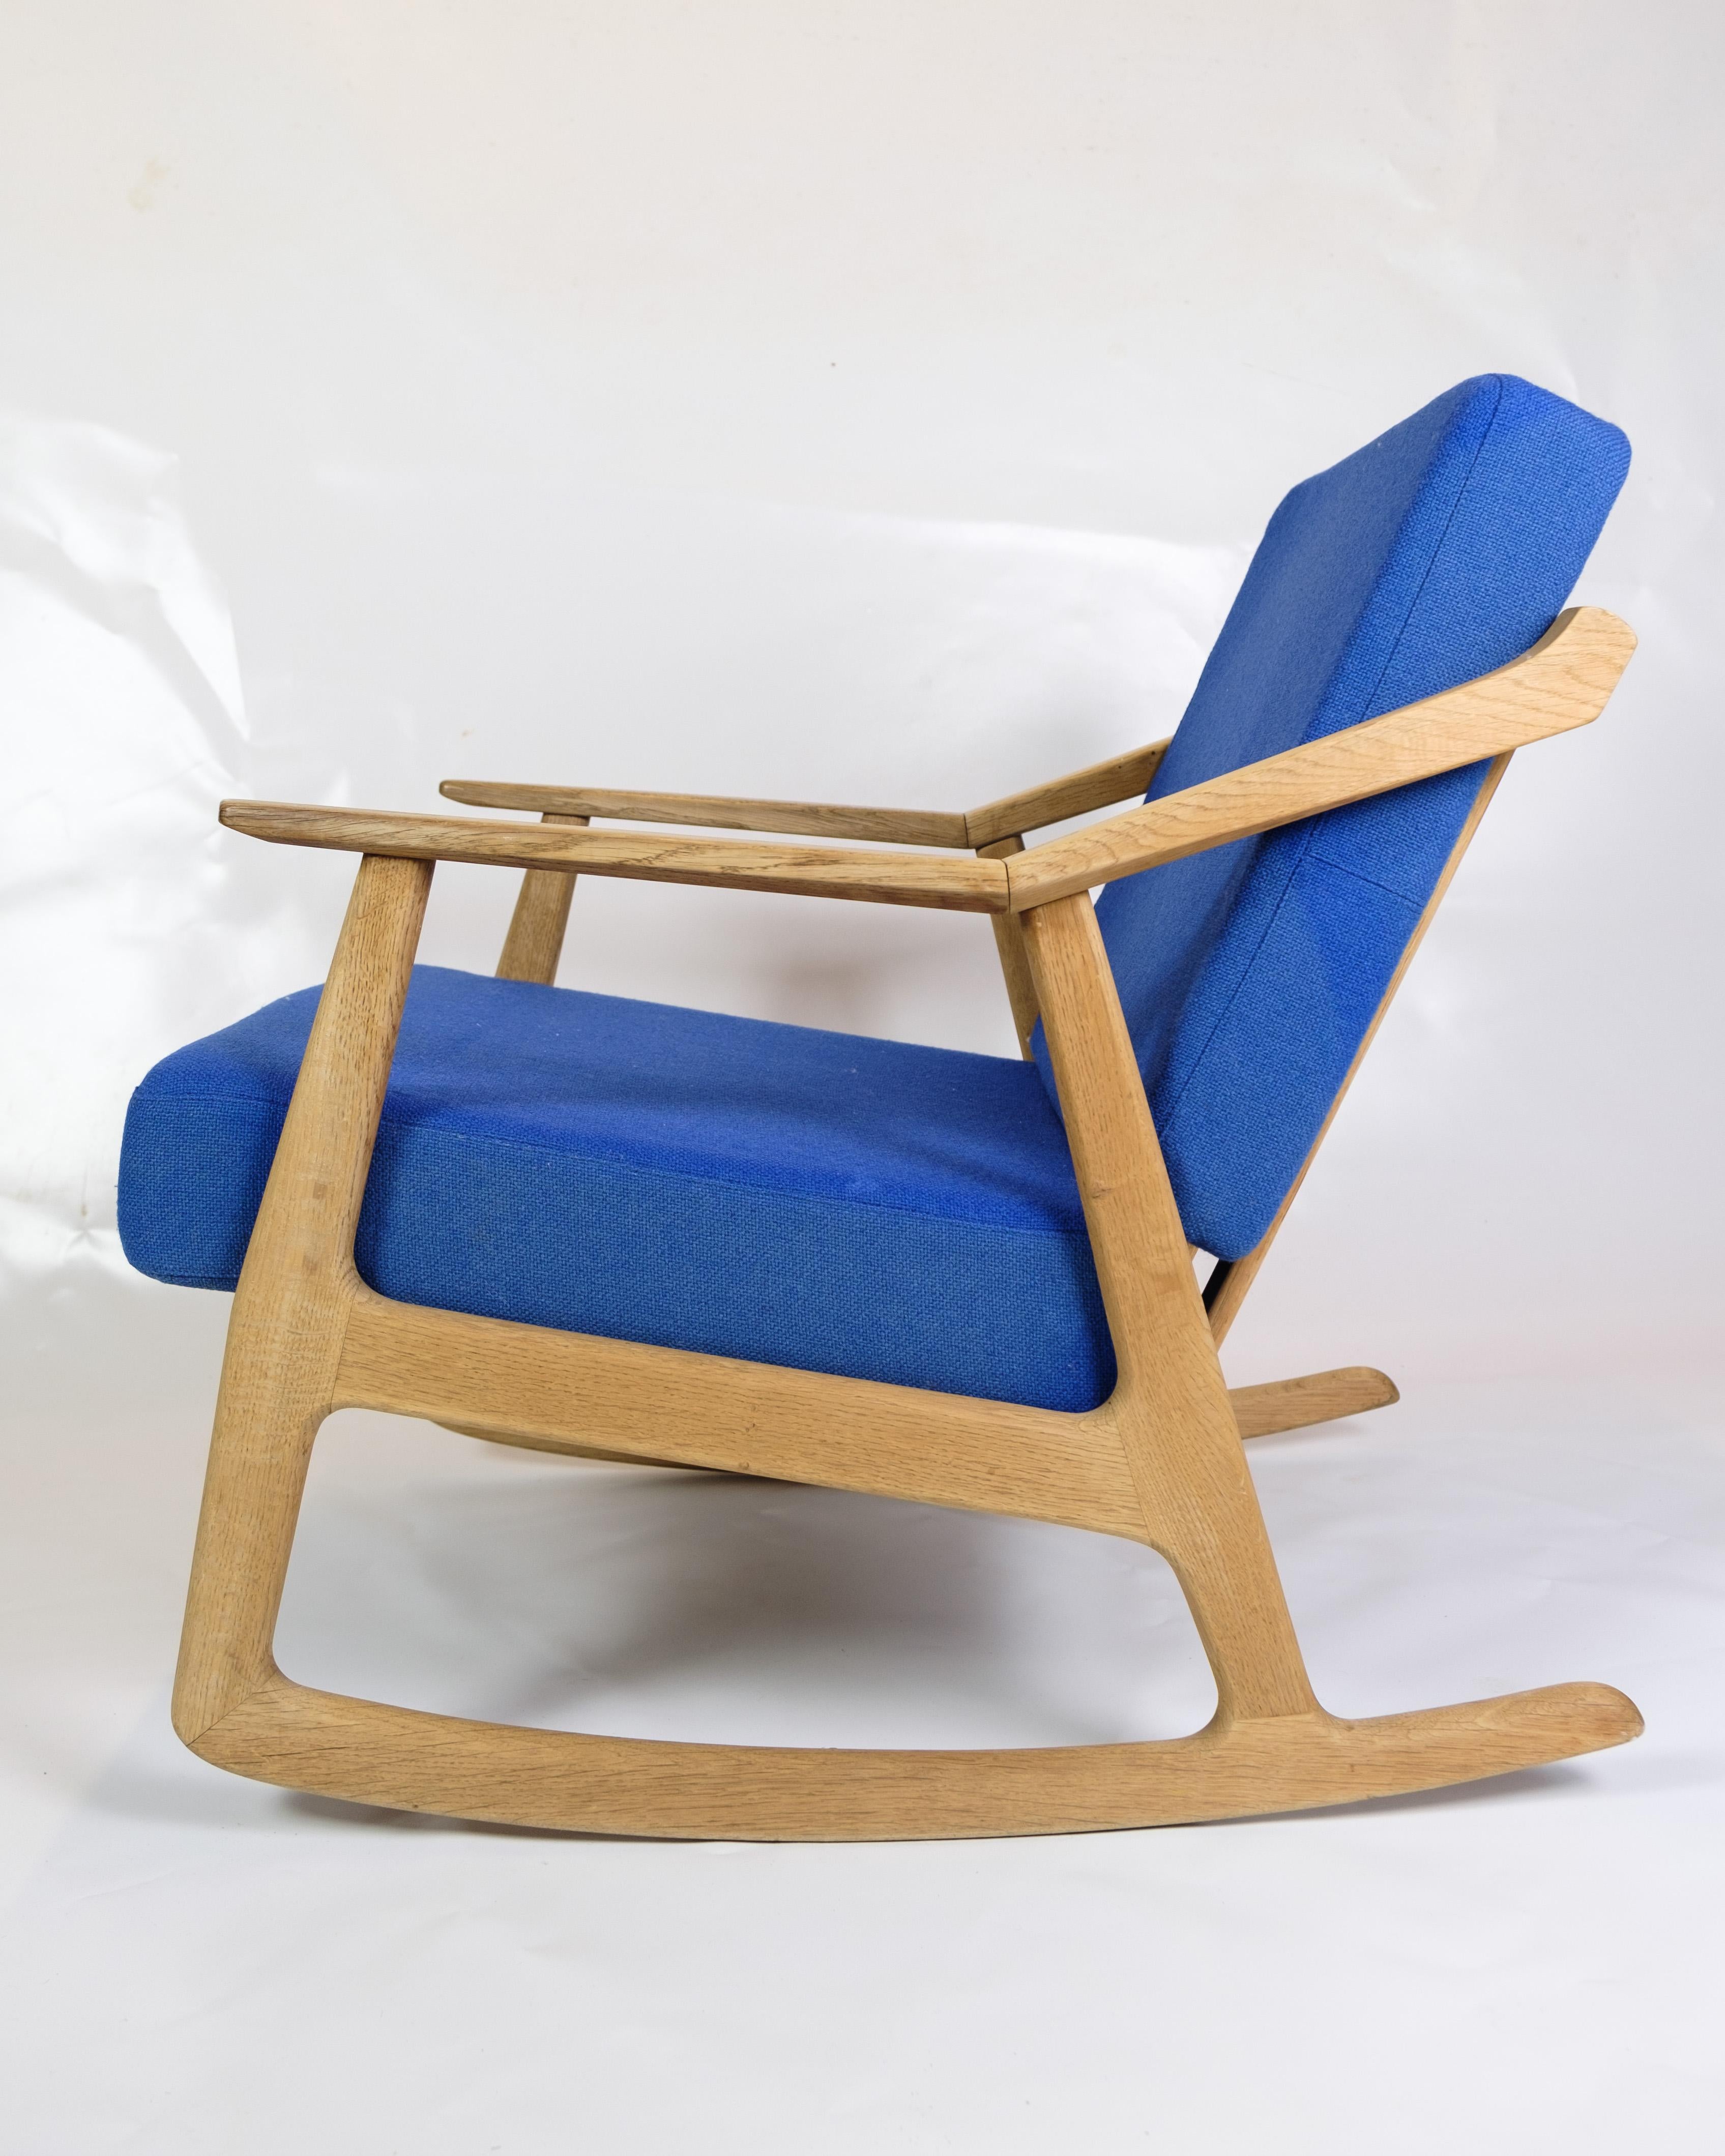 1960s Oak Rocking Chair Designed by H. Brockmann-Petersen, Upholstered in Blue Fabric by Randers Møbelfabrik

Indulge in the timeless comfort of this rocking chair, a design attributed to H. Brockmann-Petersen and meticulously crafted in oak by